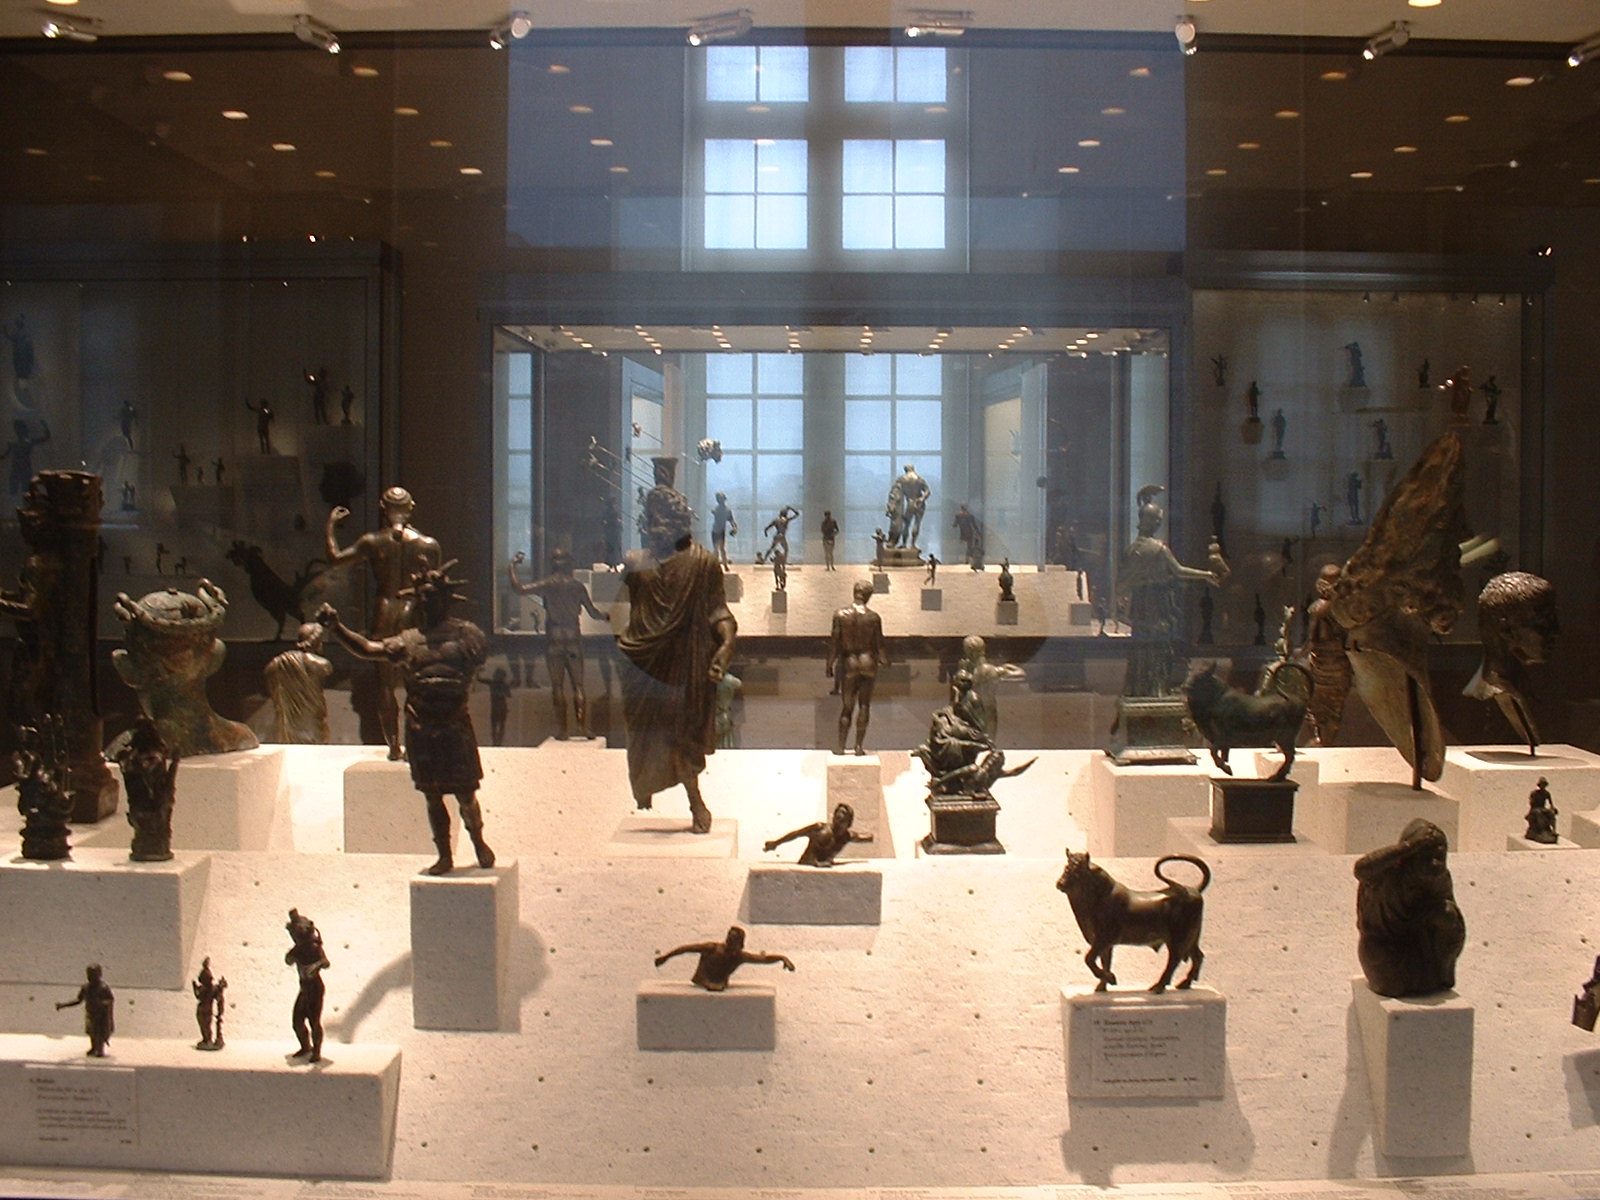 Exhibits in the Louvre.